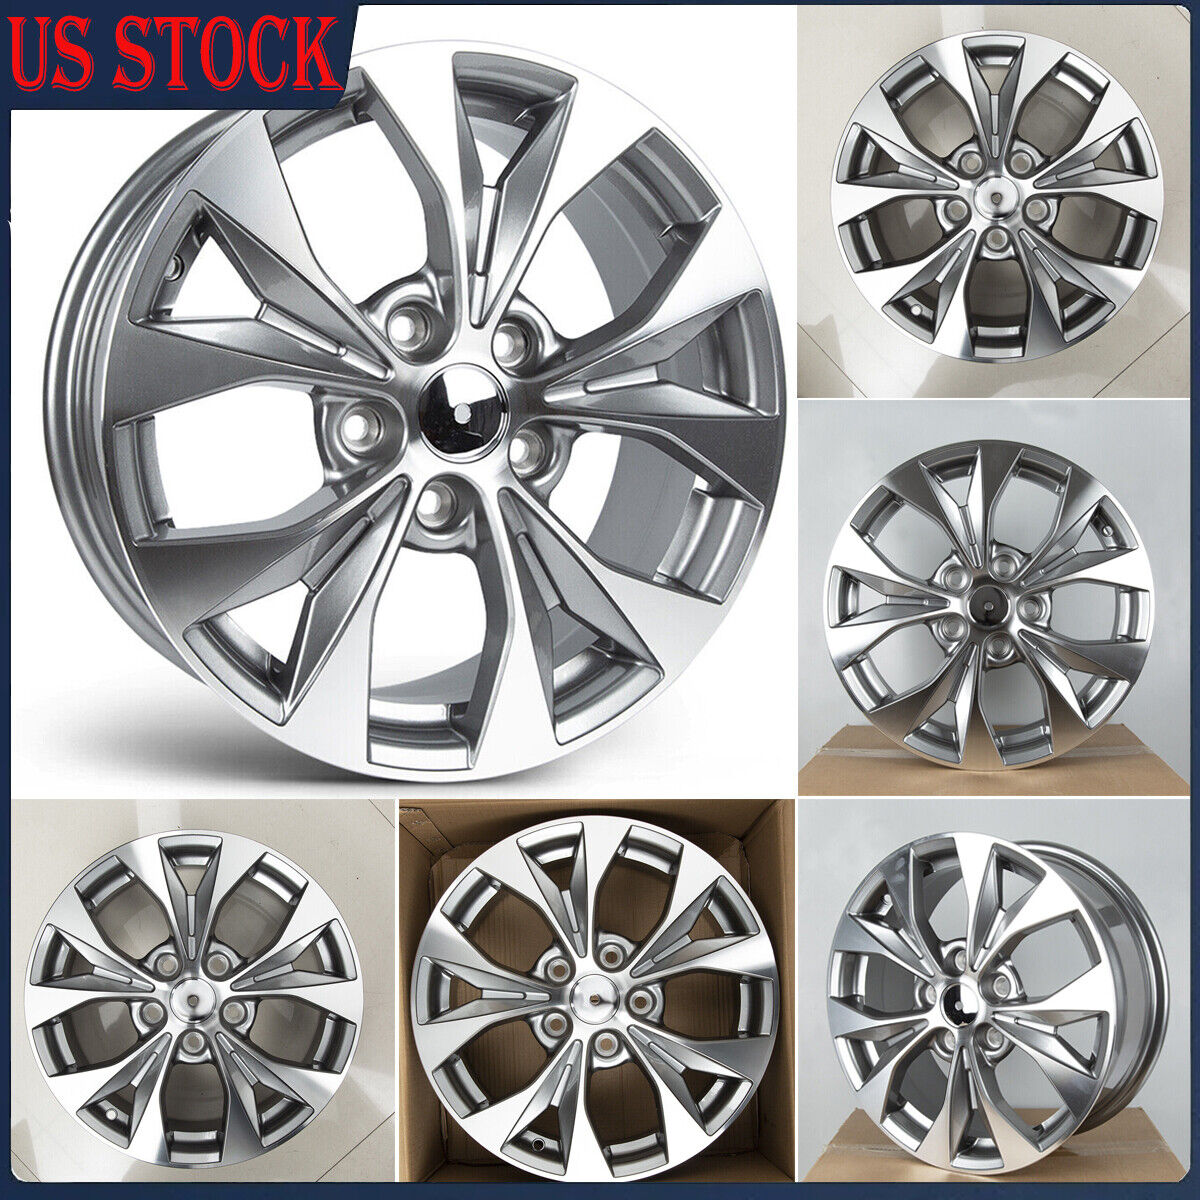 NEW 16 inch Alloy Replacement Wheel Rim For Honda Accord XH169 OEM Quality Wheel